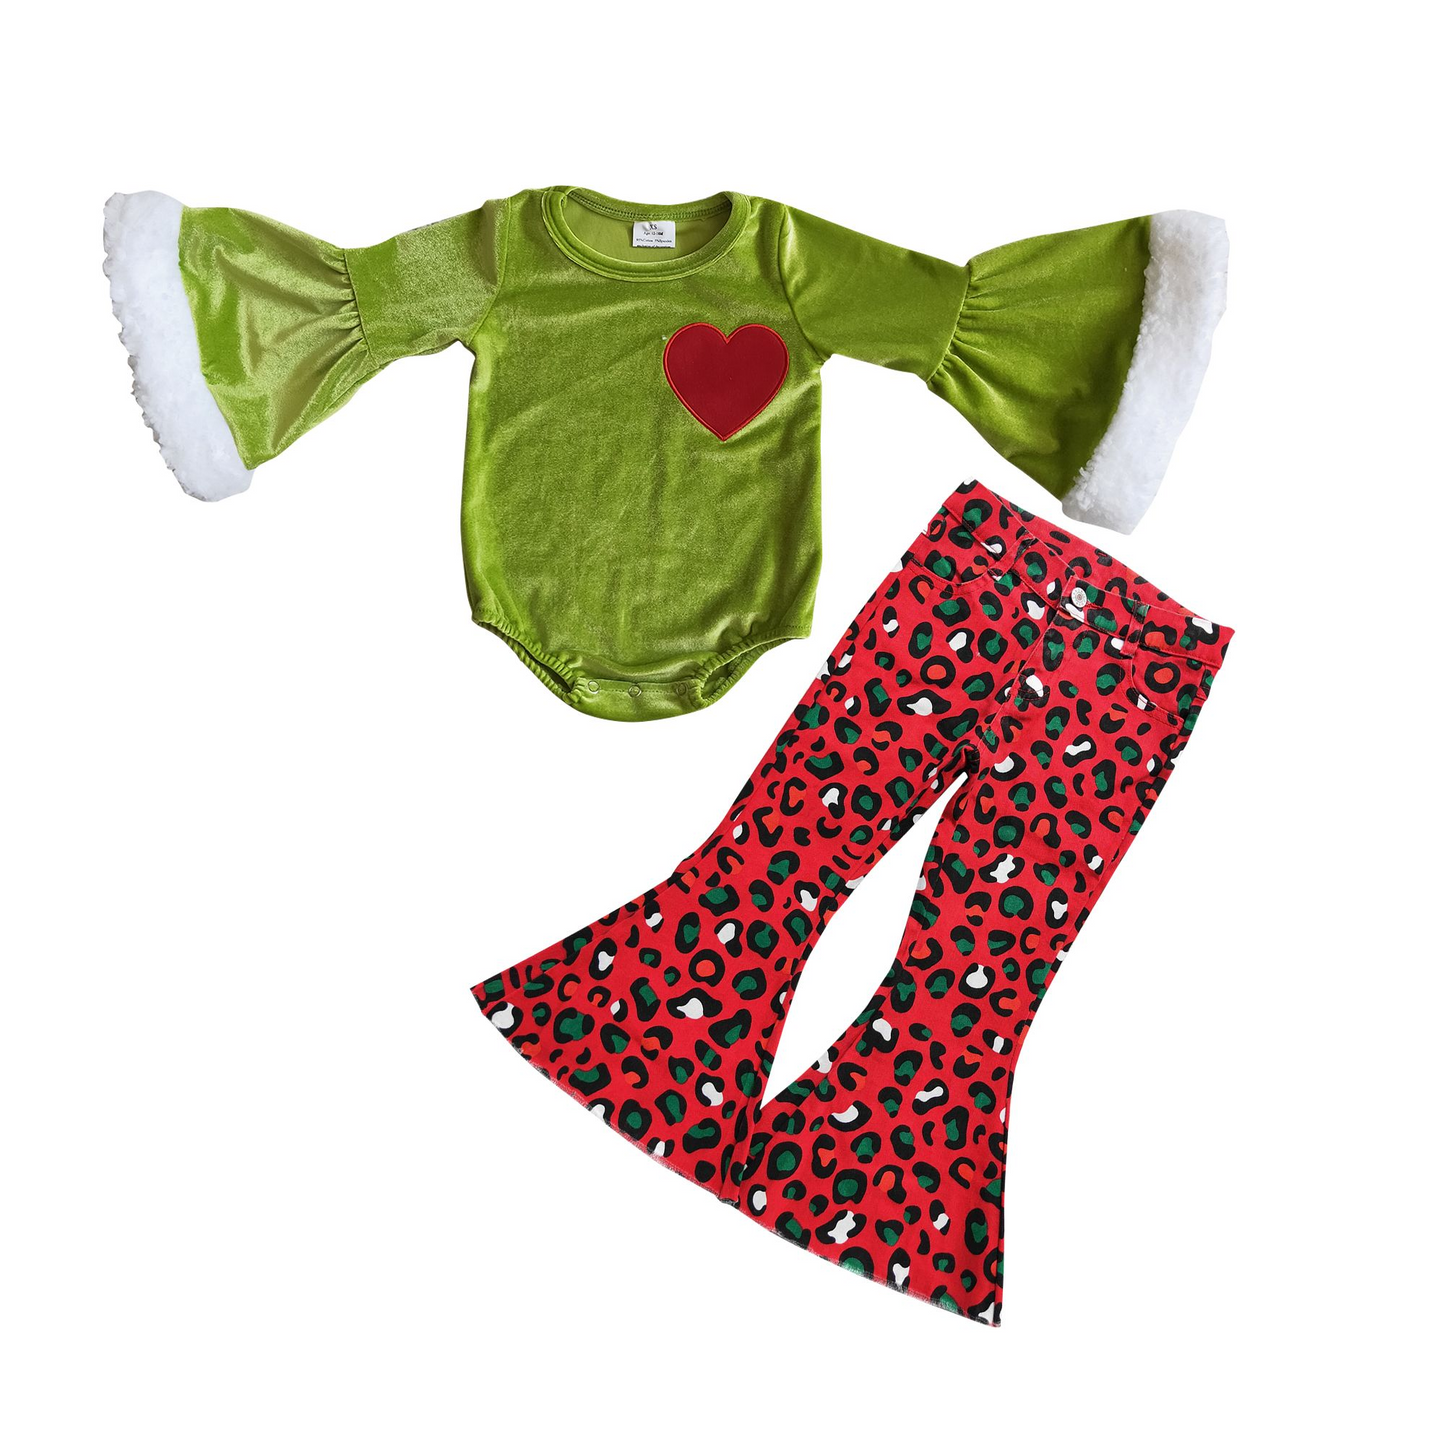 Heart green face romper 6 A4-4 red leopard denim pants P0229 girls Christmas outfits